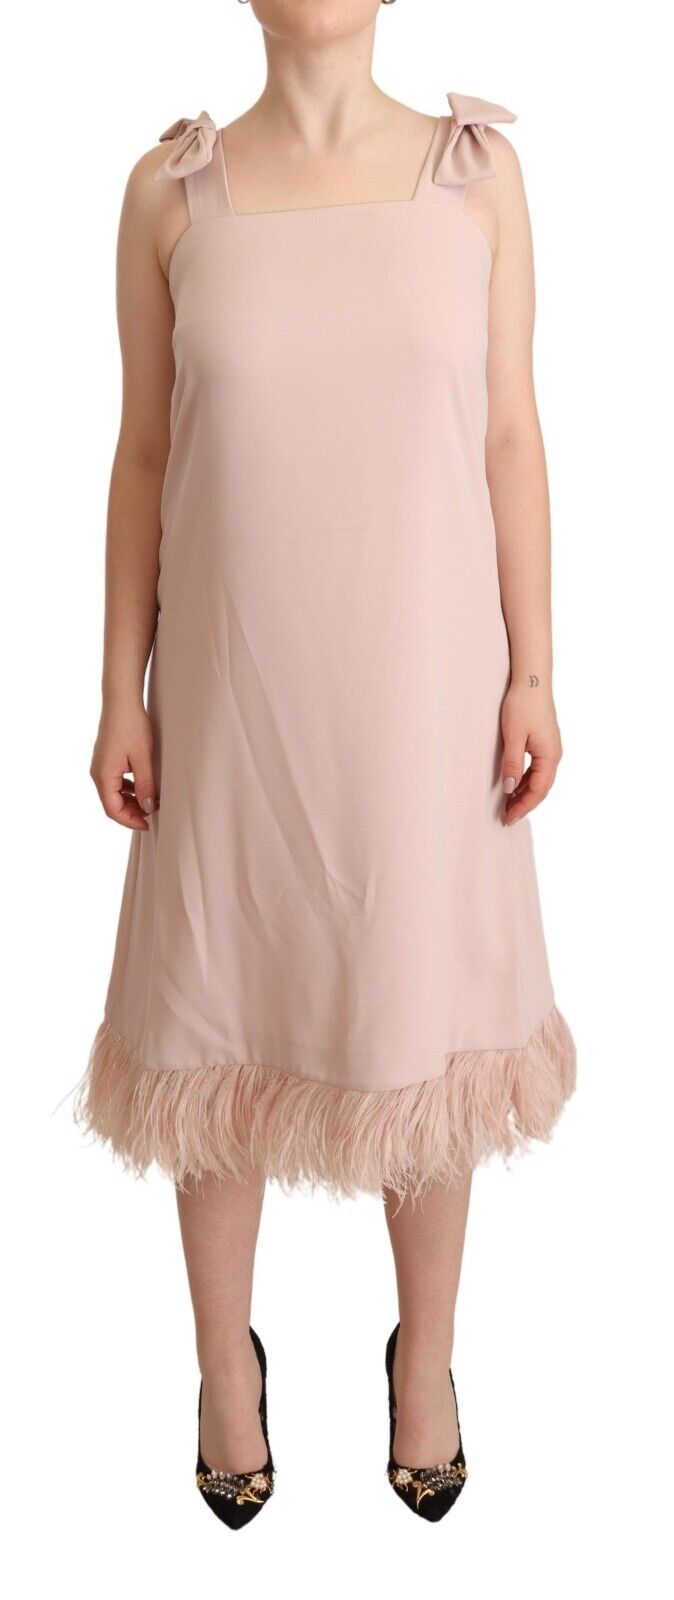 P.A.R.O.S.H. Chic Sleeveless Midi Dress with Feather Women's Trim